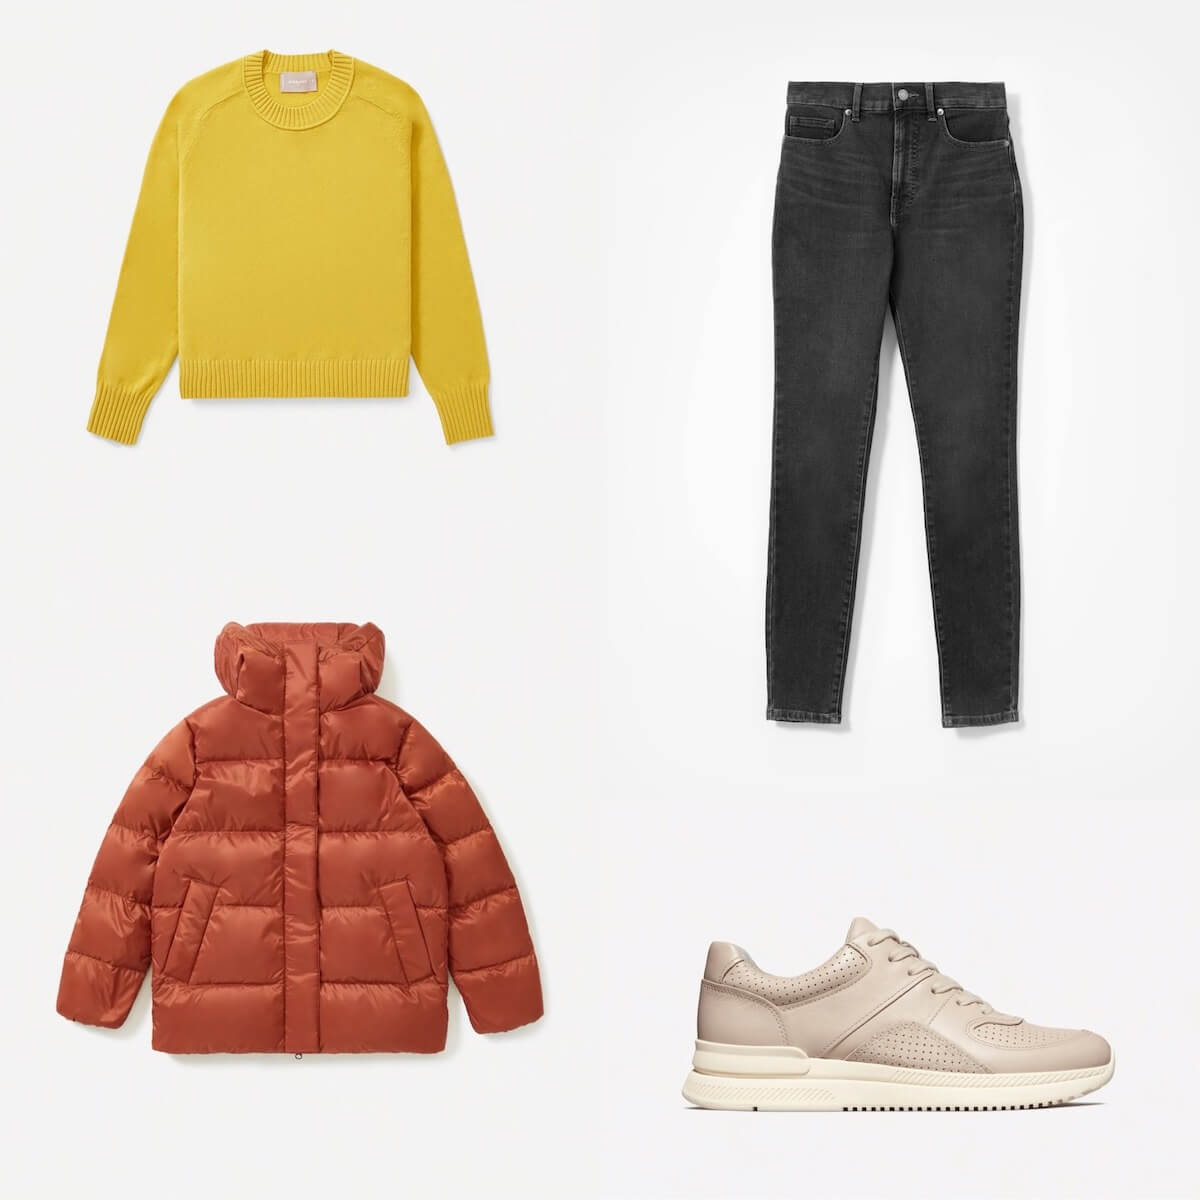 Four items from Everlane, including a yellow sweater, jeans, an orange puffy jacket, and sneakers.